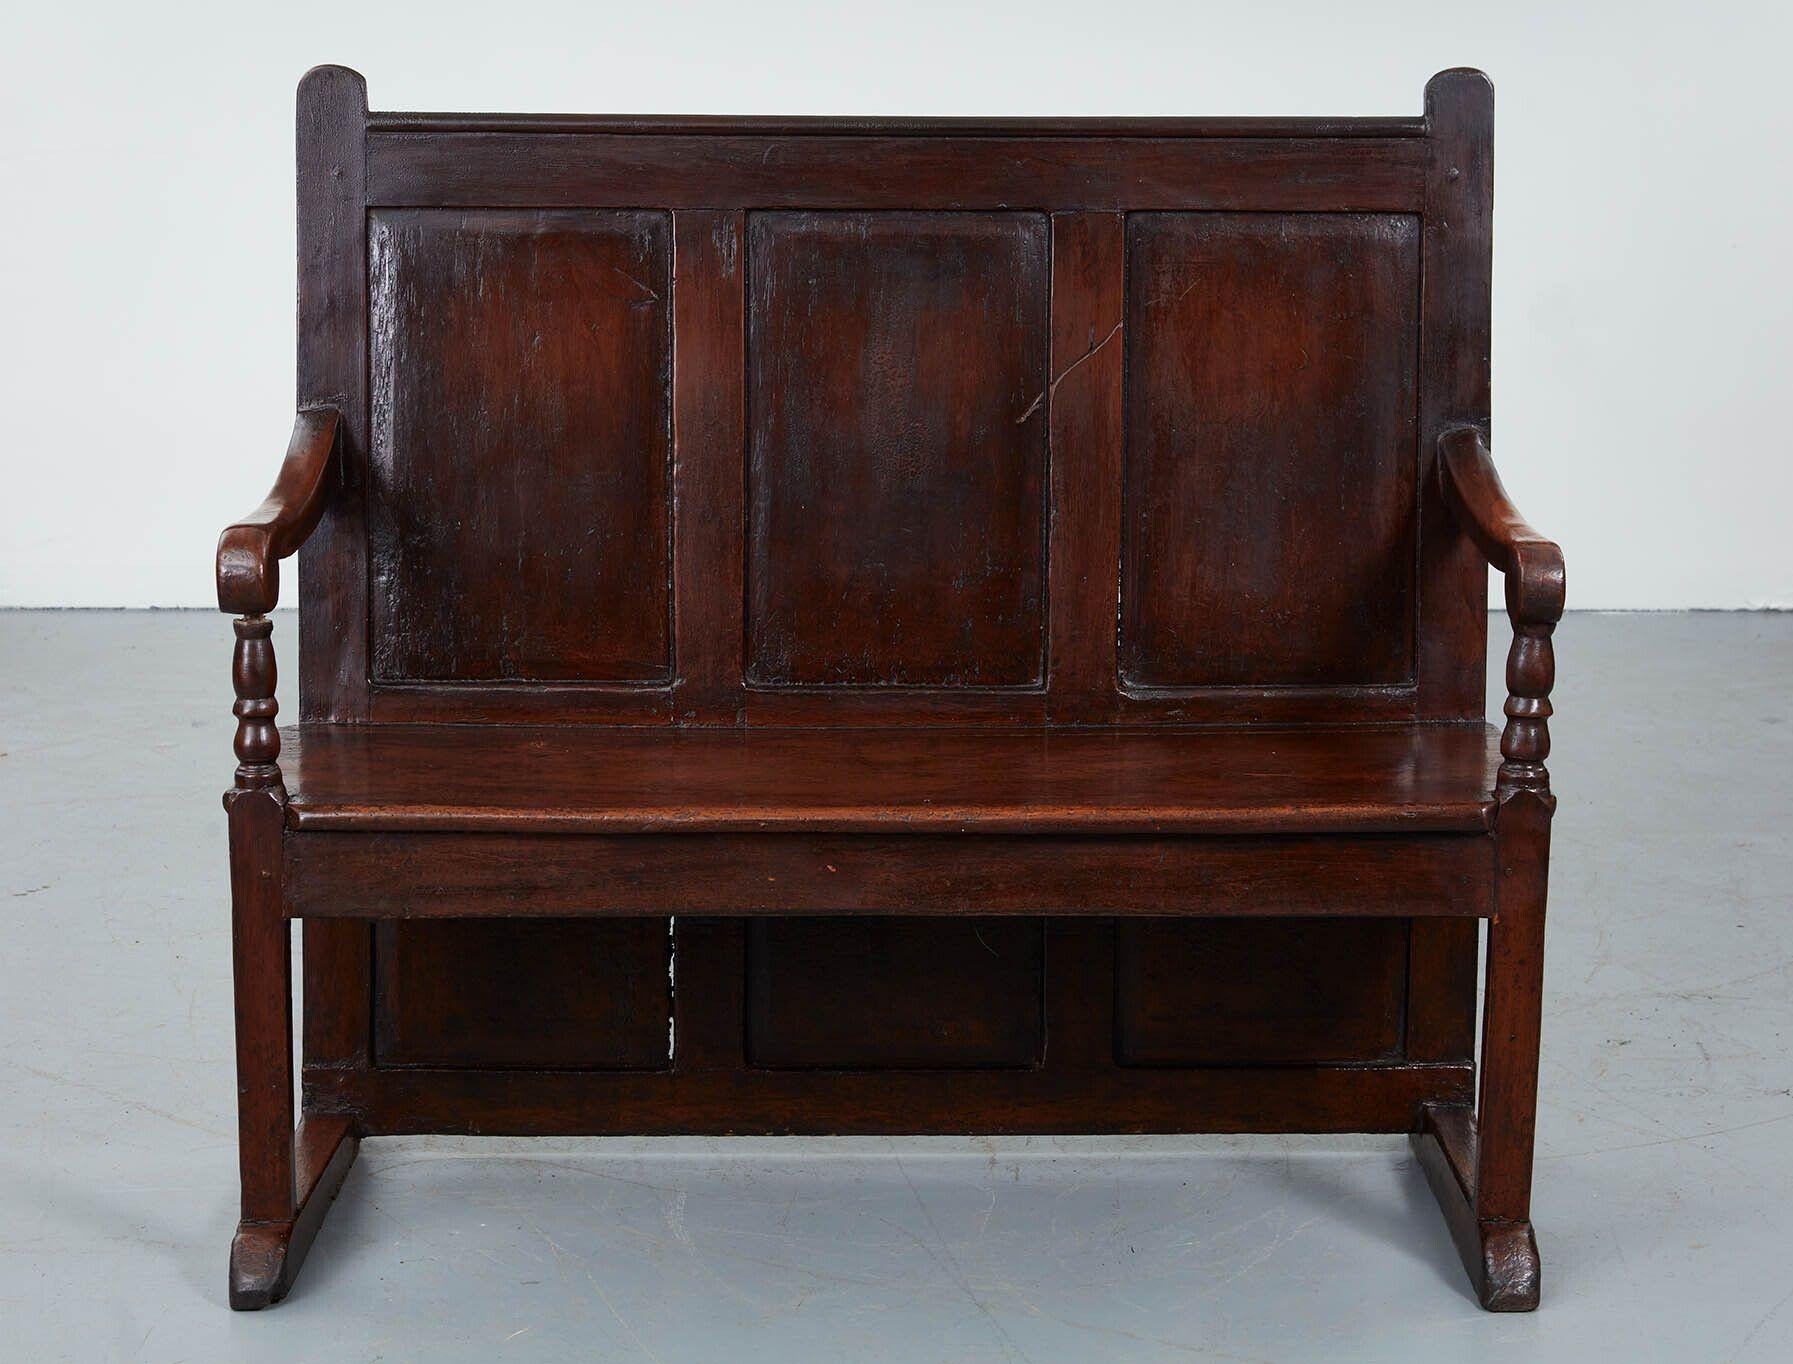 An 18th century West Country painted pine settle, the raised panel back extending almost to the floor (to keep out drafts), on open sled-form feet, with shaped arms, and raised ears to the paneled back, retaining wonderful old scumbled paint surface.